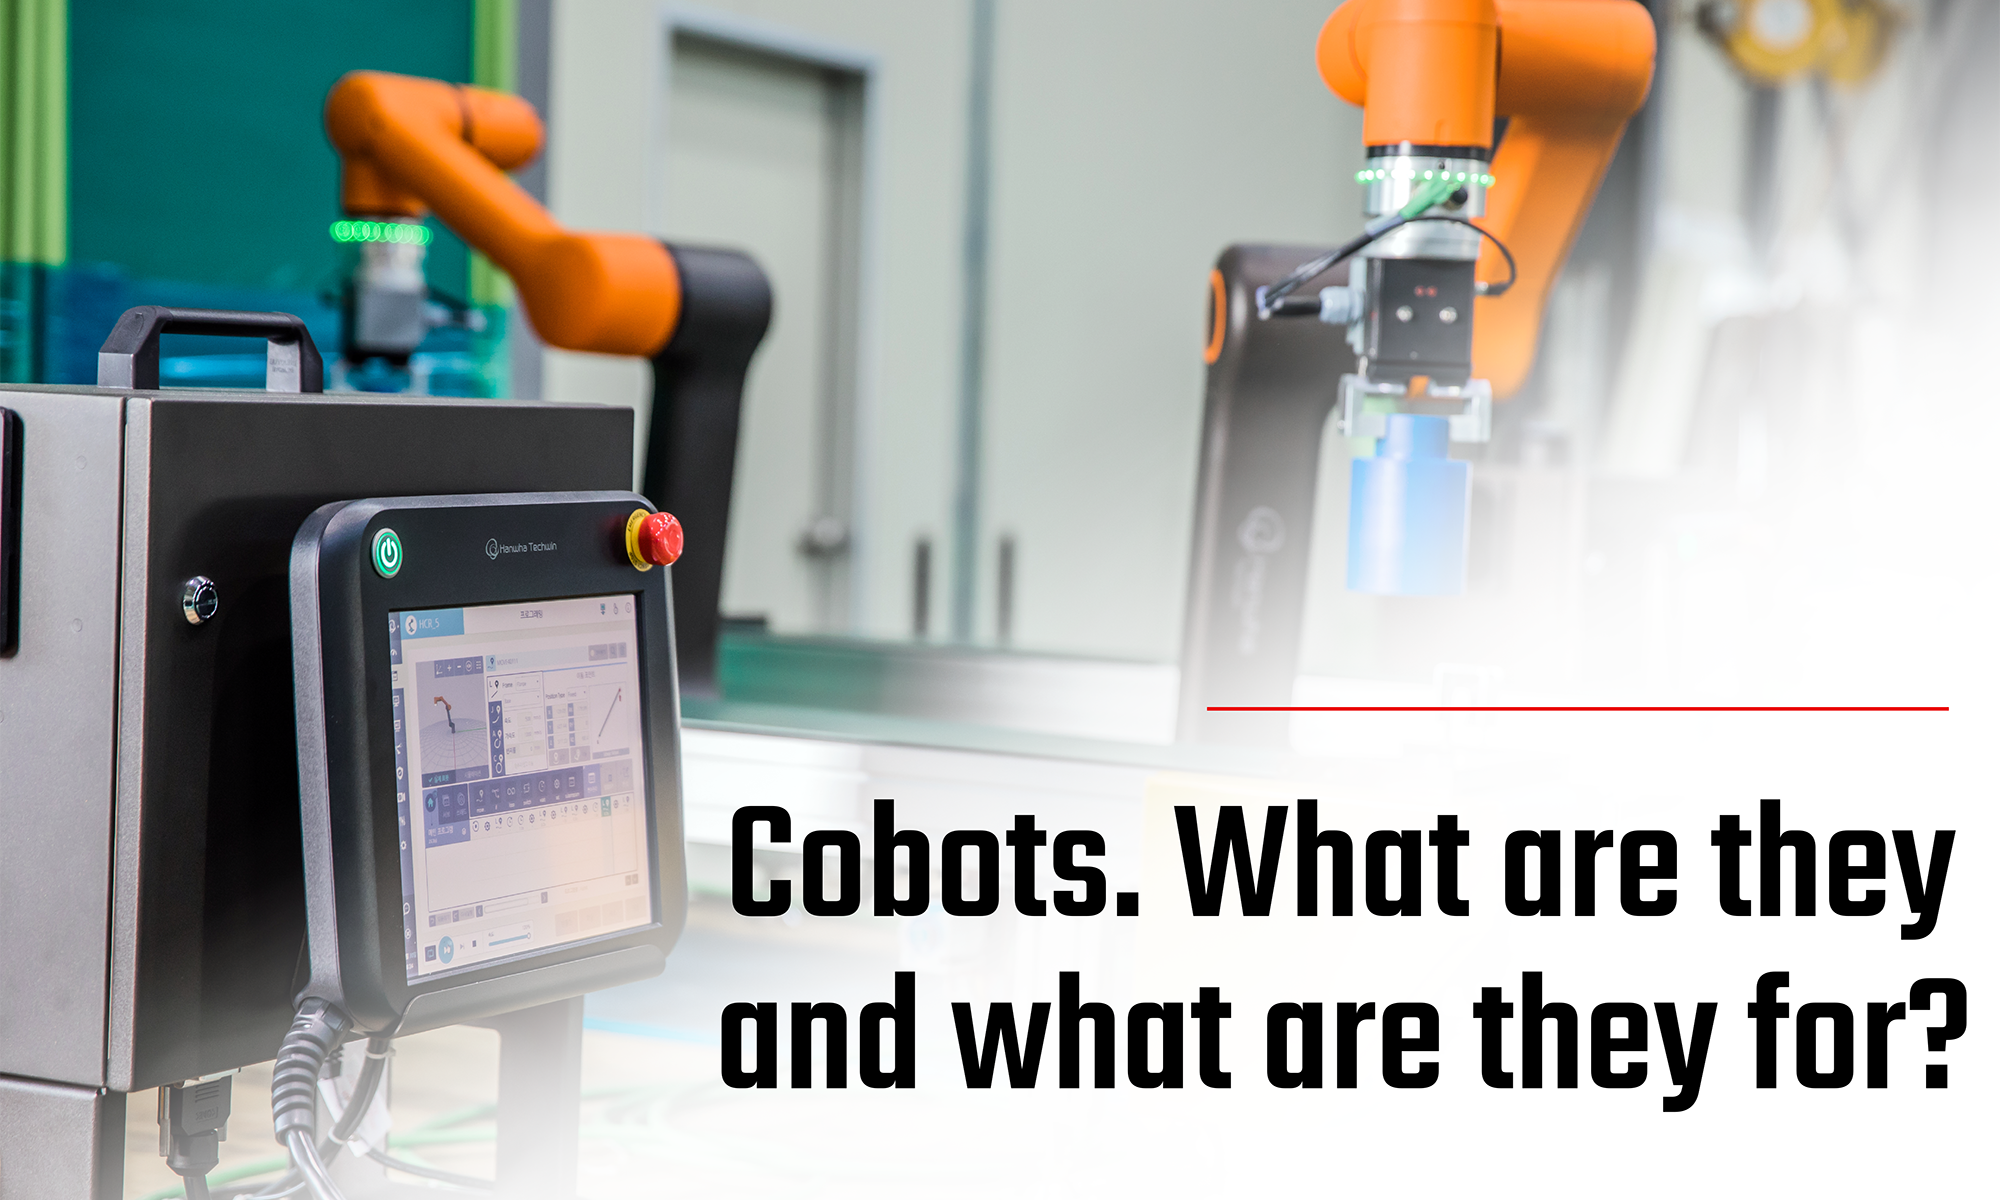 Cobots, What are they and what are they for?